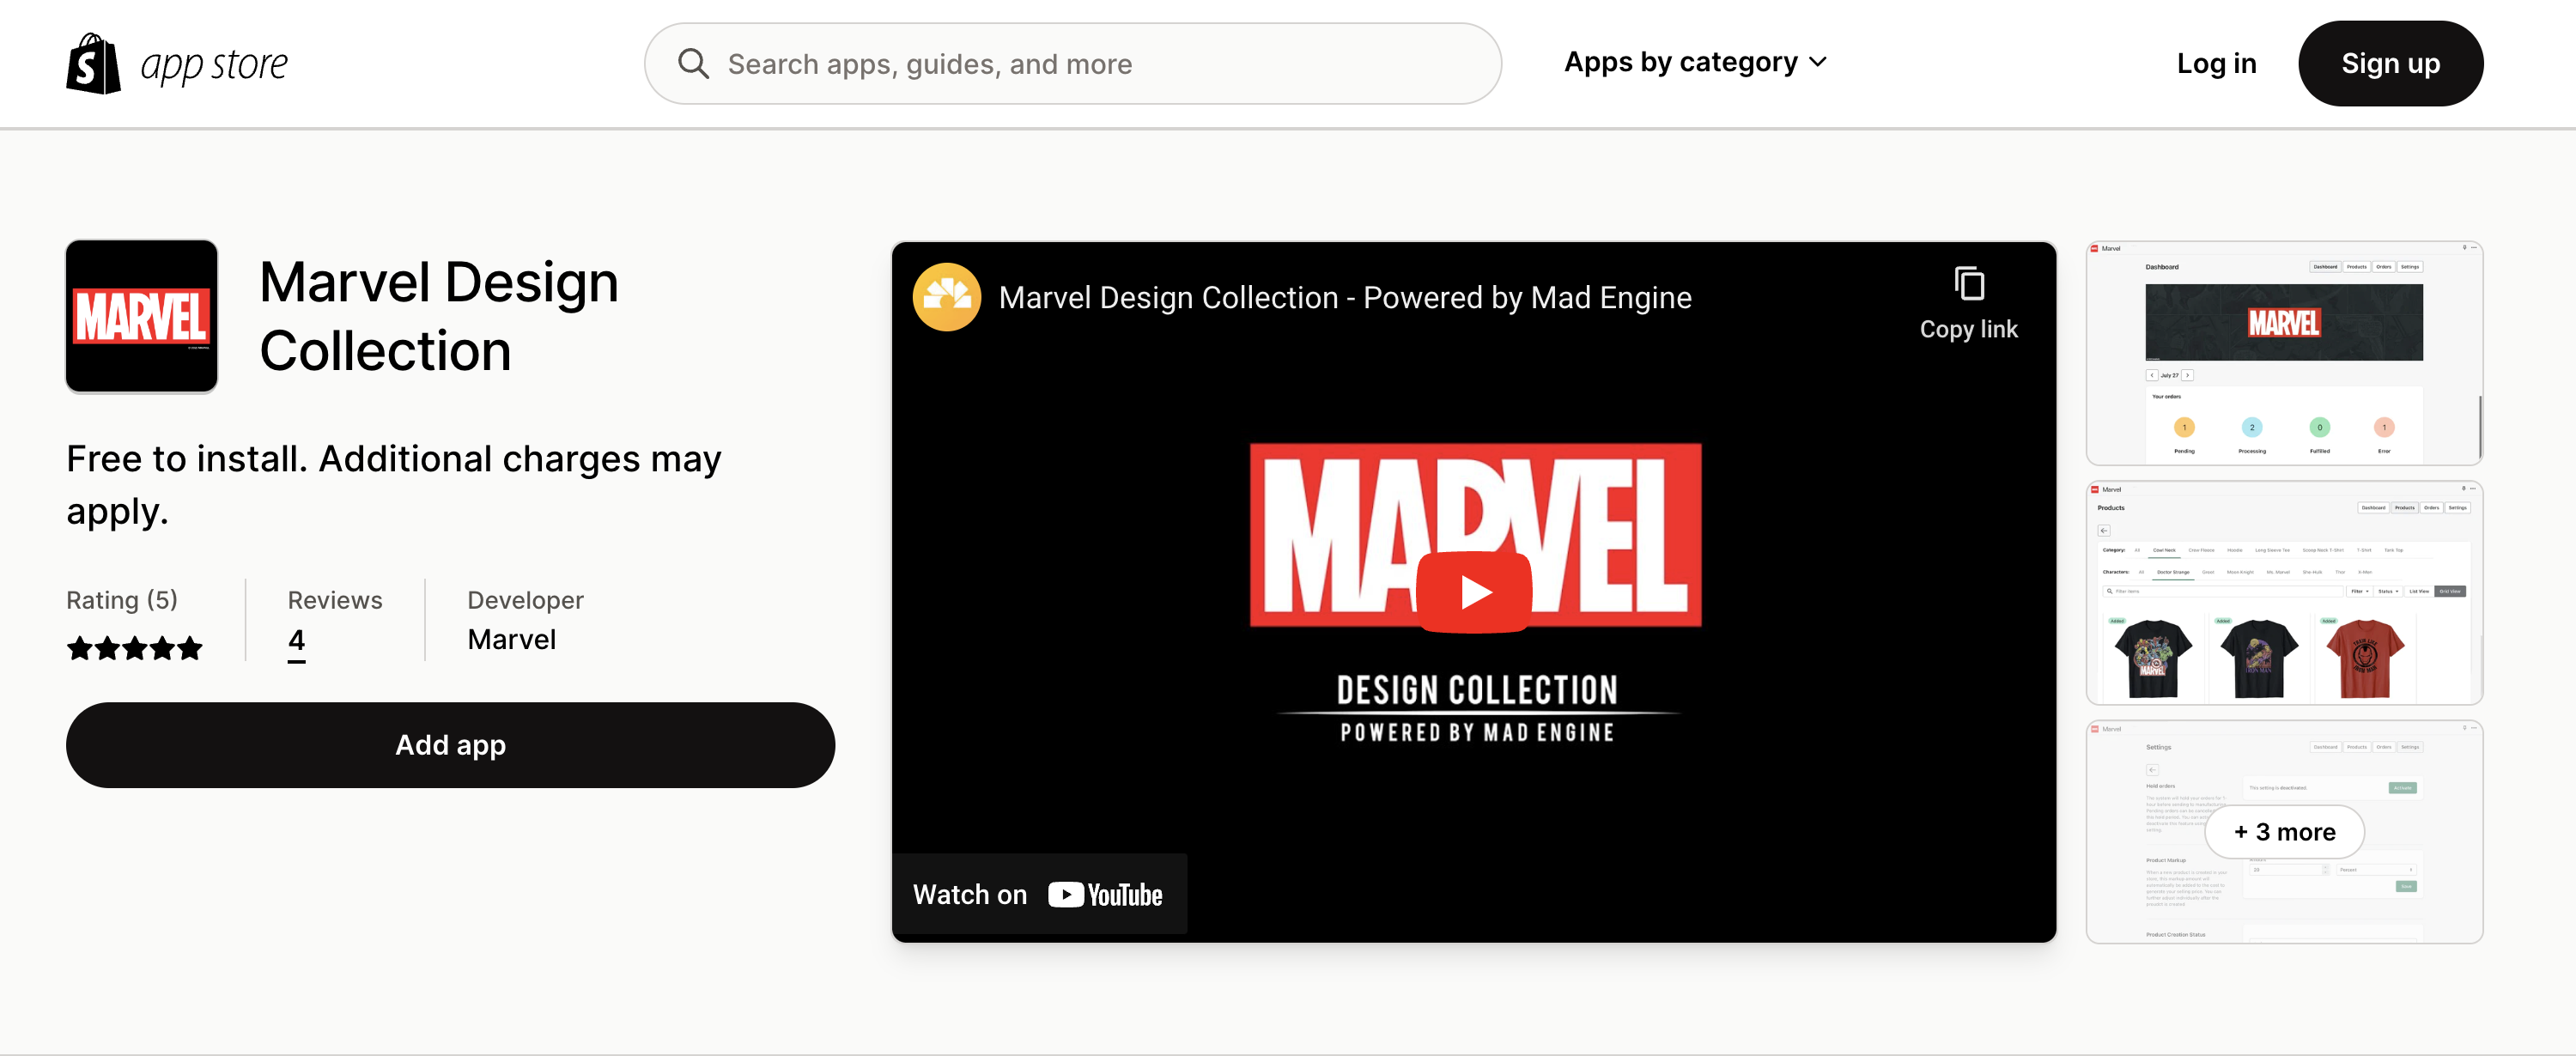 Marvel Design Collection app store